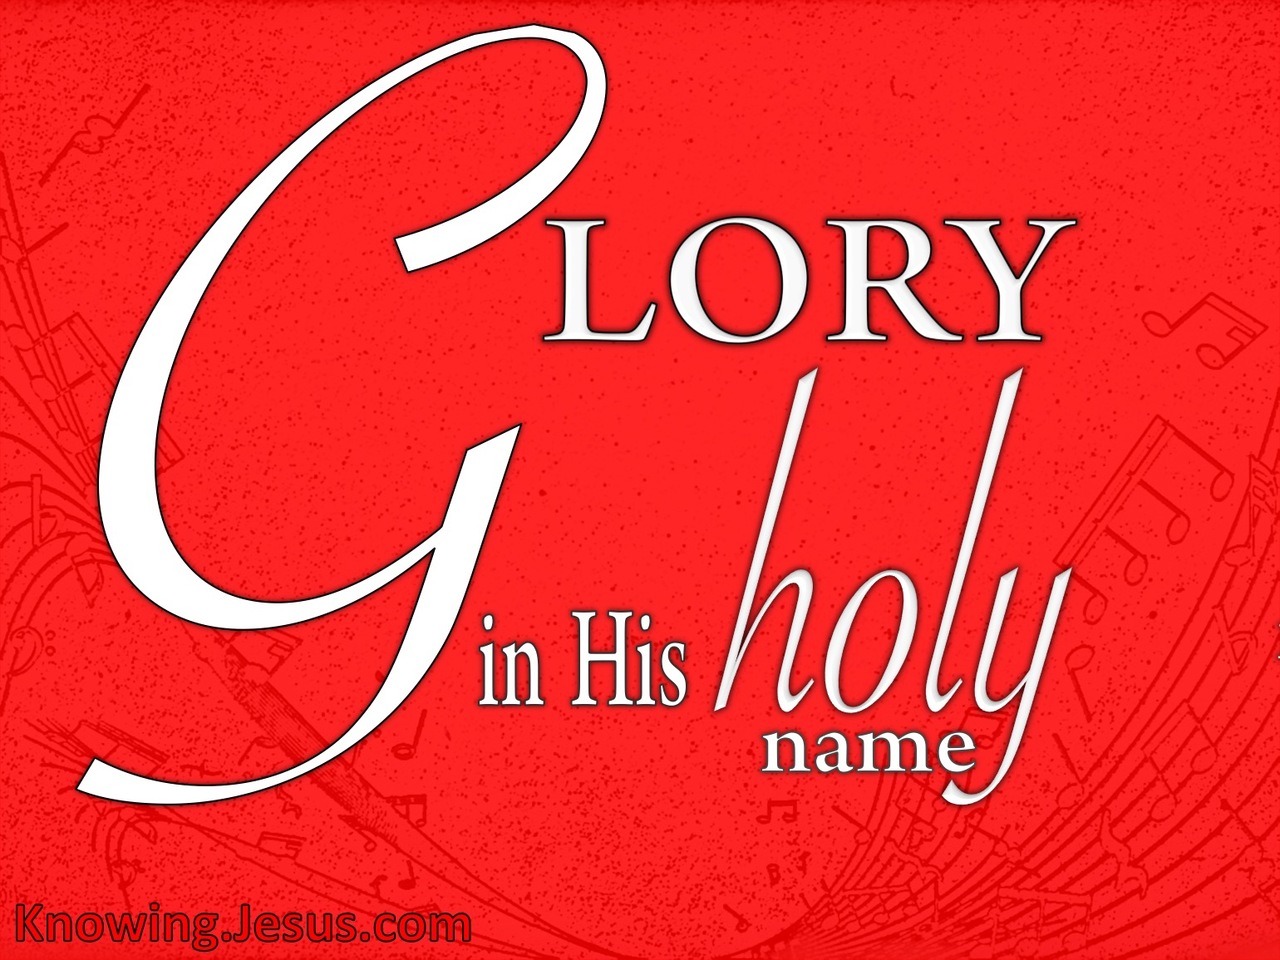 1 Chronicles 16:10 Glory To His Holy Name (red)